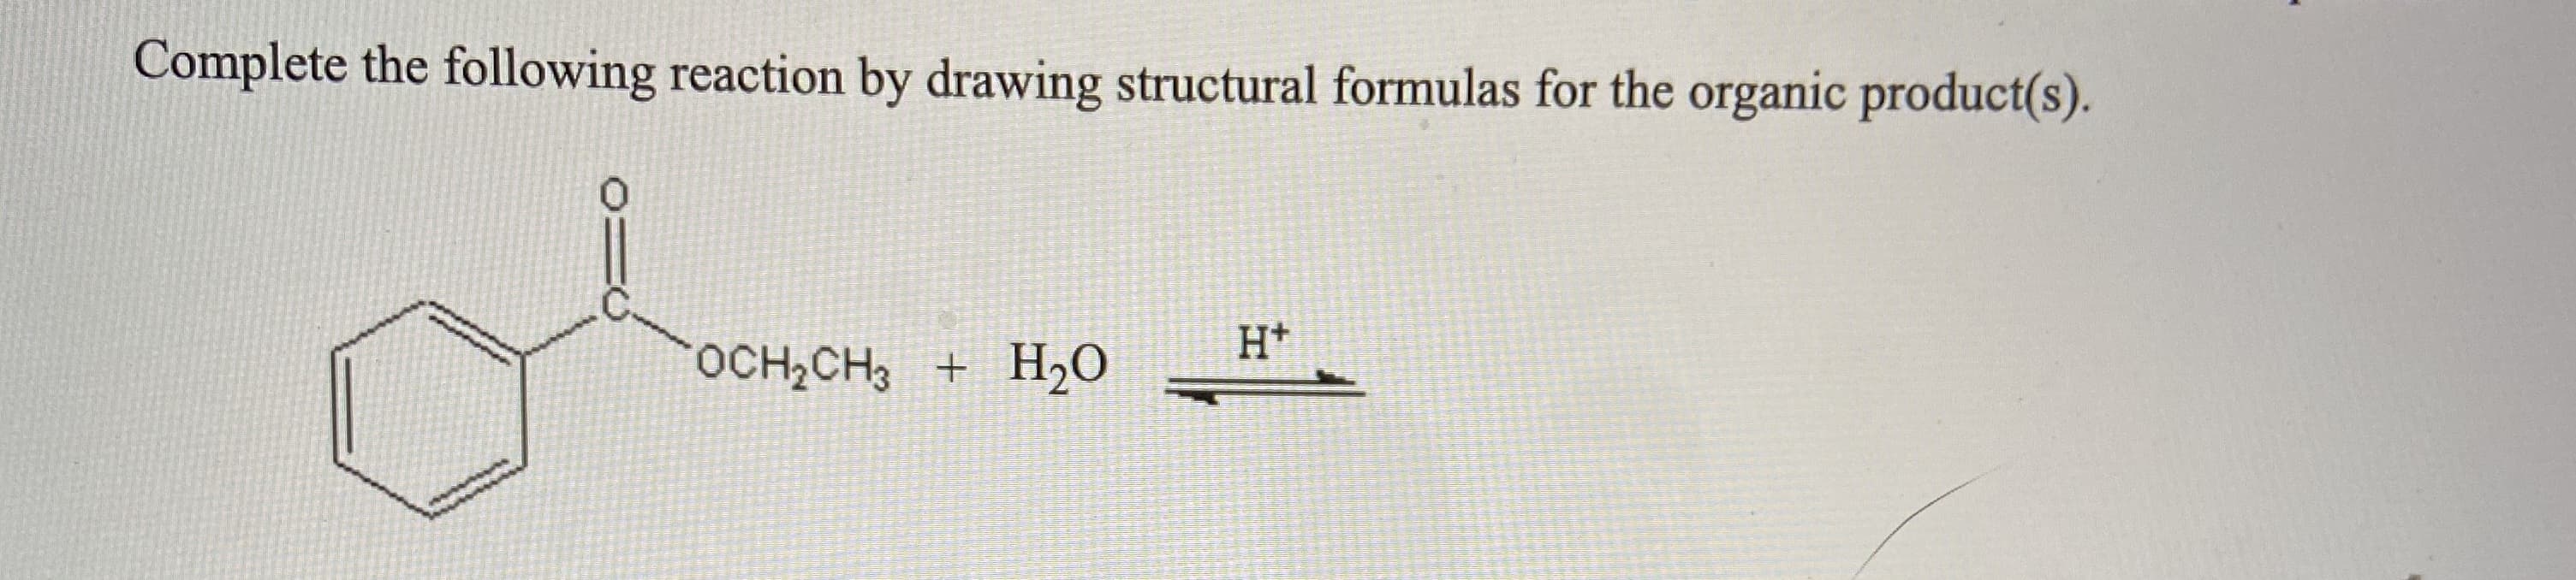 Complete the following reaction by drawing structural formulas for the organic product(s).
H+
OCH2CH3 +
H2O
